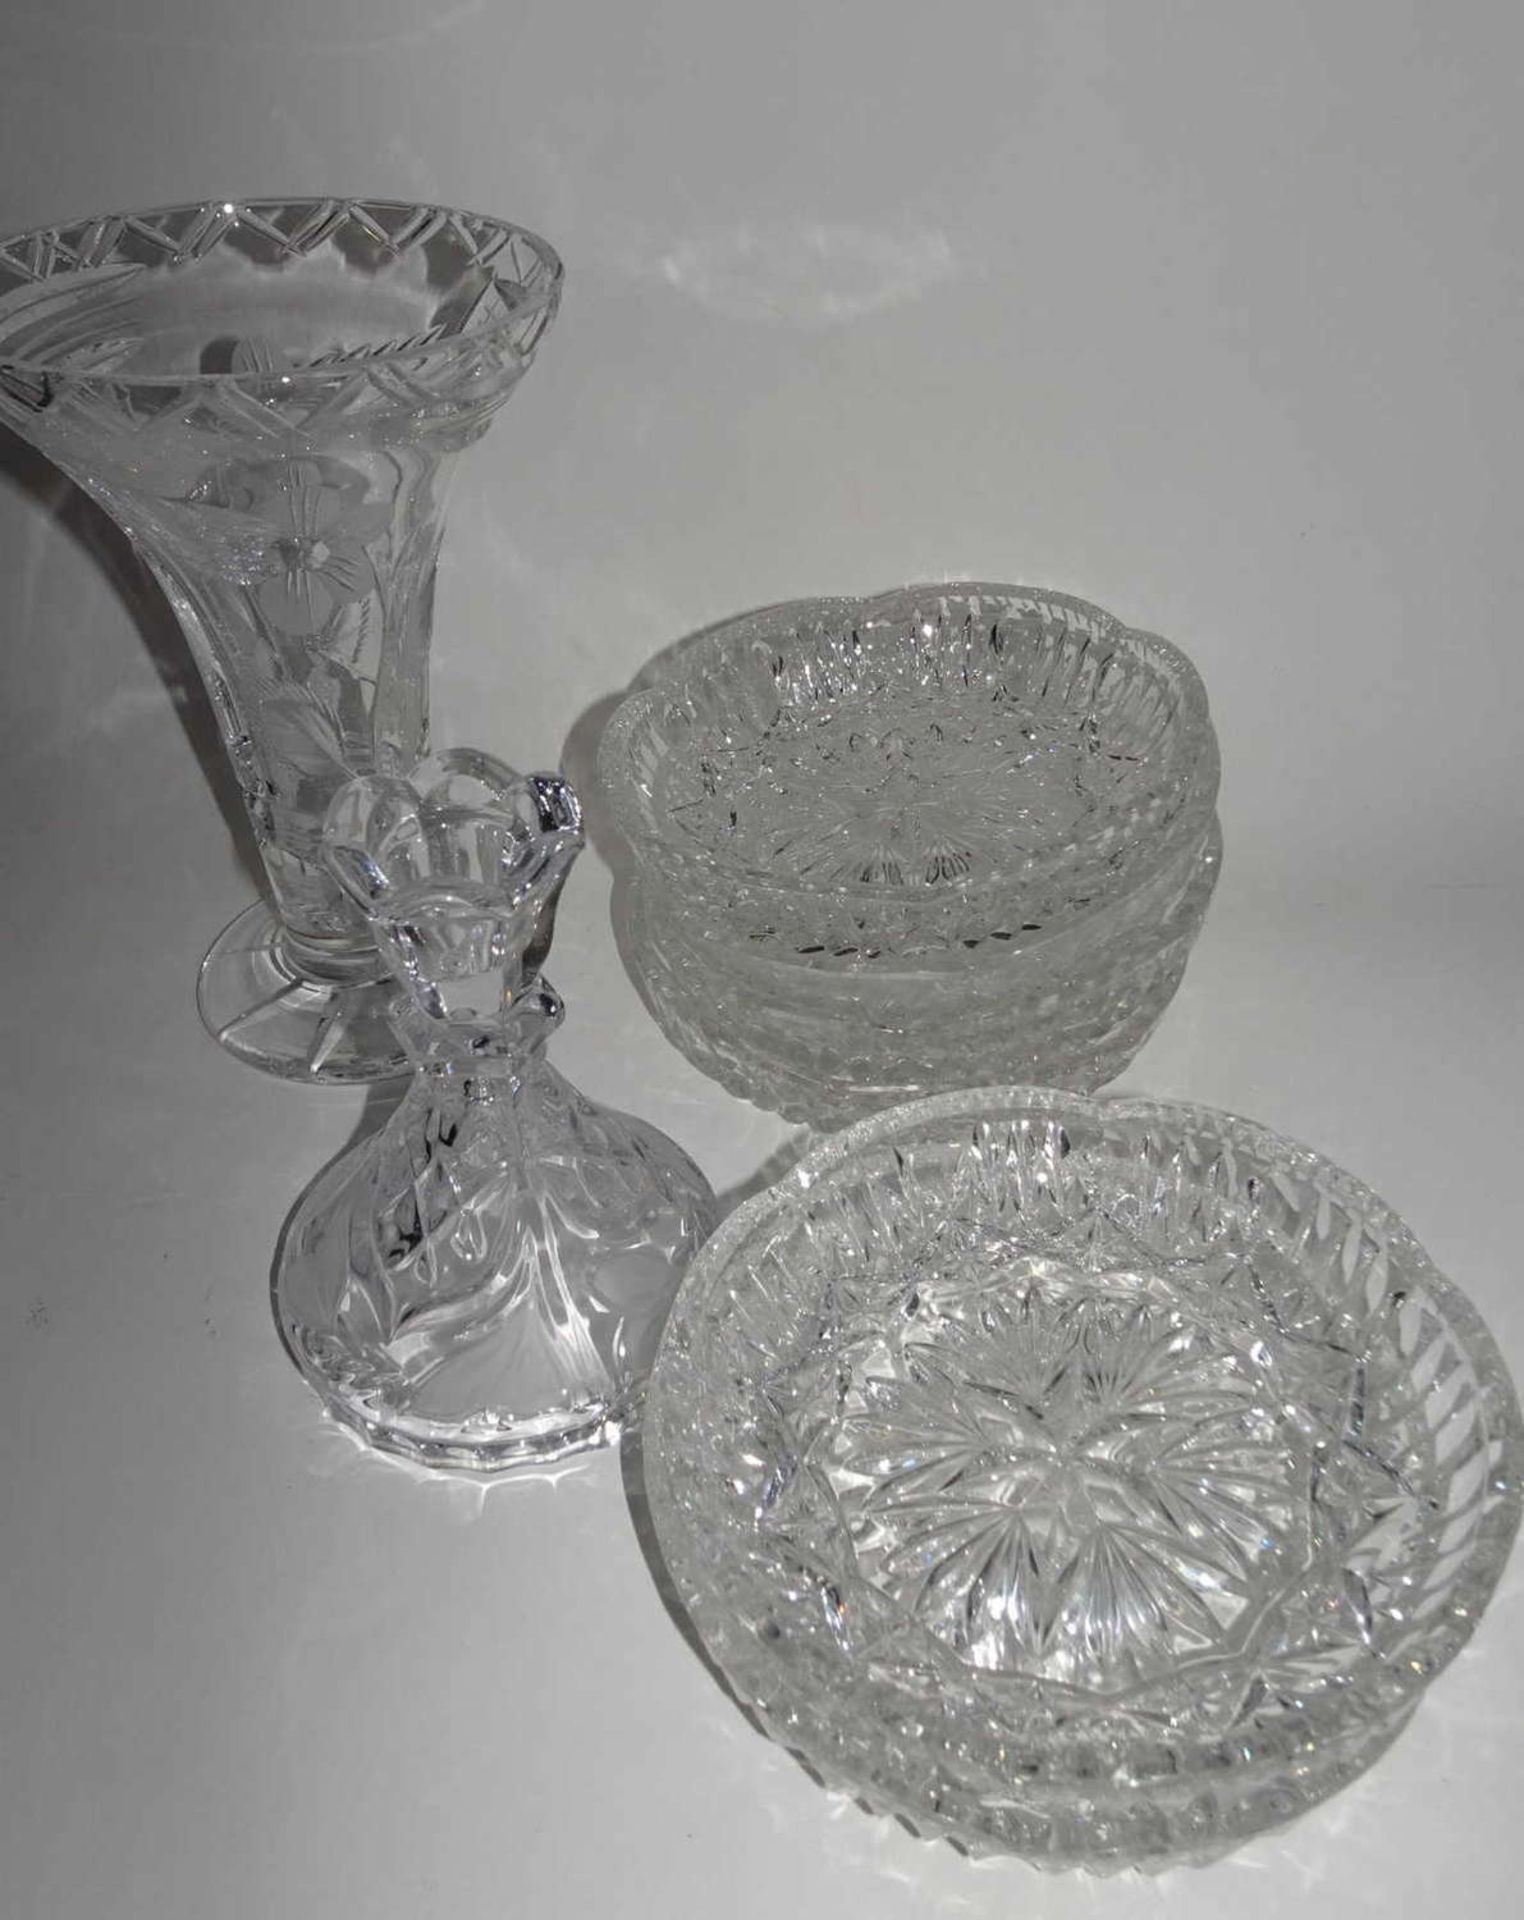 Lot lead crystal, with 6 salad bowl, 1 candlestick, and a vase.